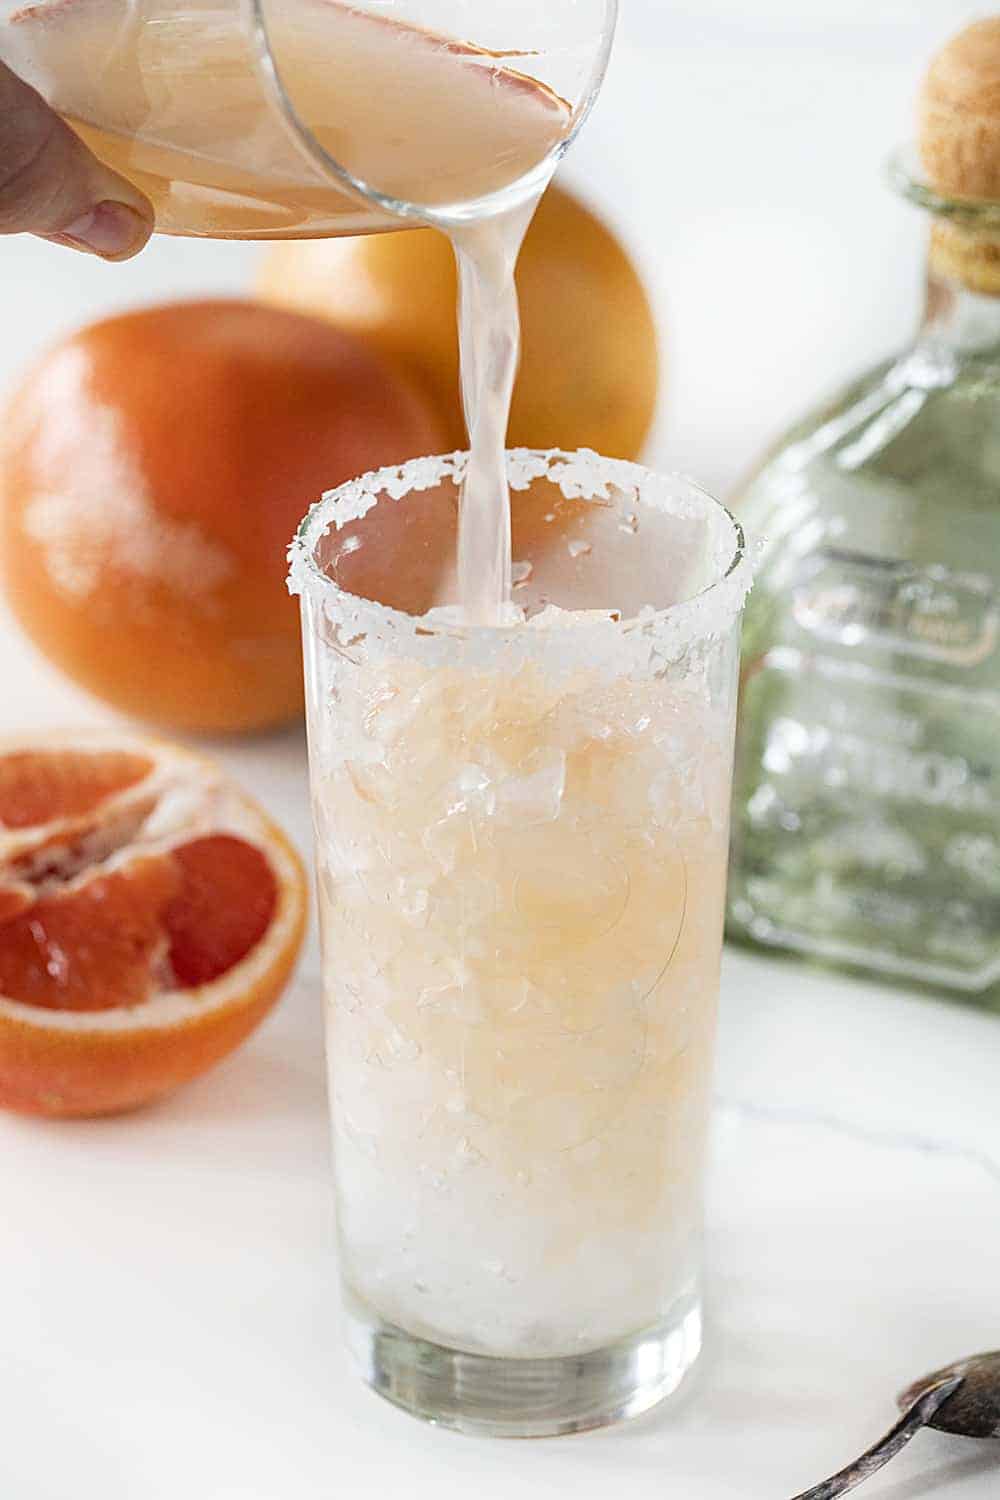 Pouring Grapefruit into tall glass making a Paloma